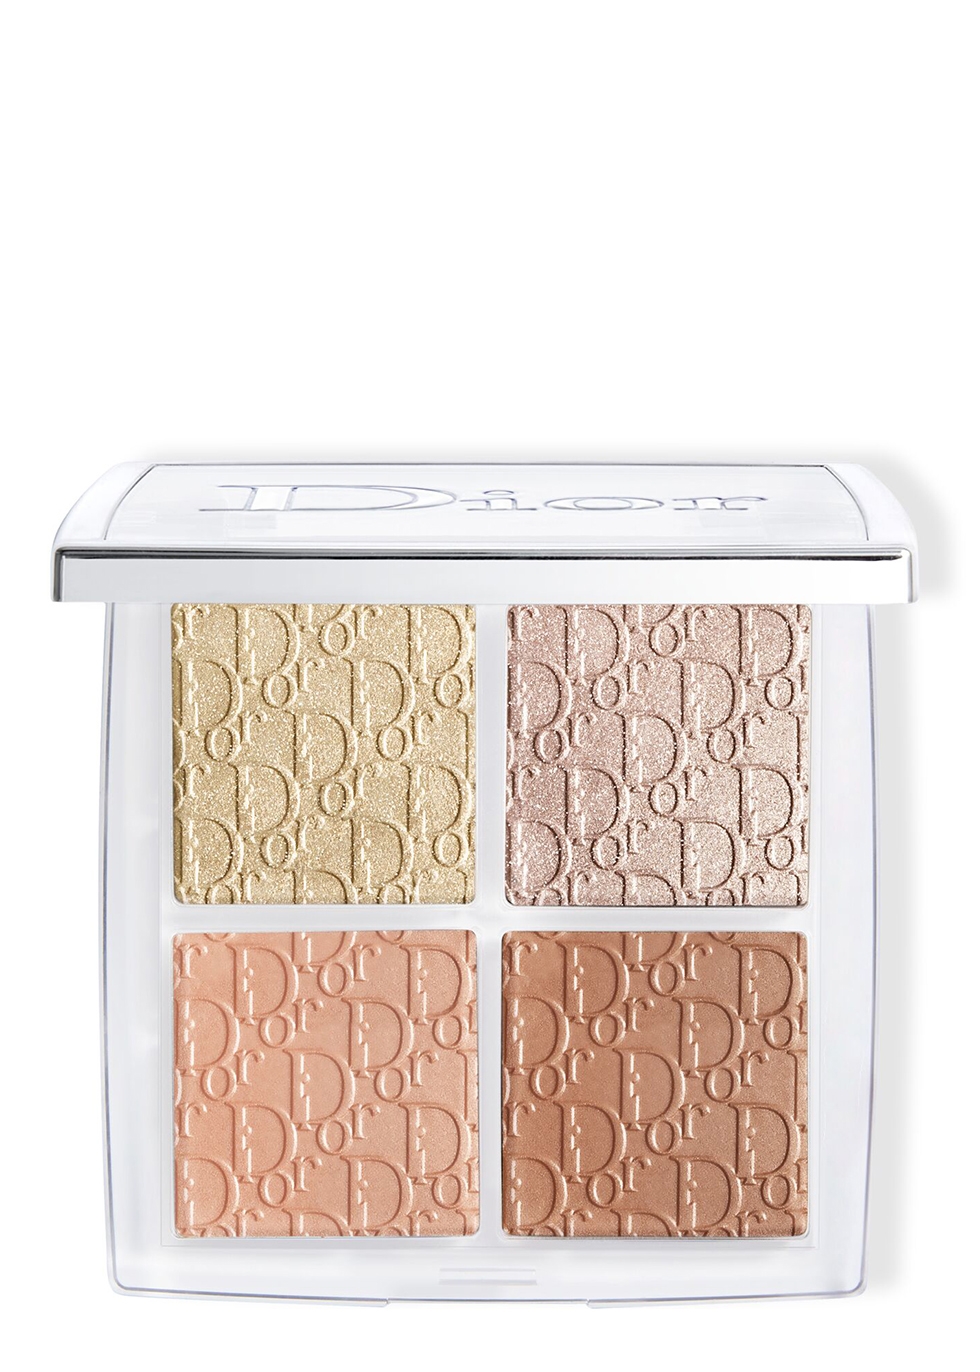 Dior Universal 001 Backstage Glow Face Palette Review  Swatches